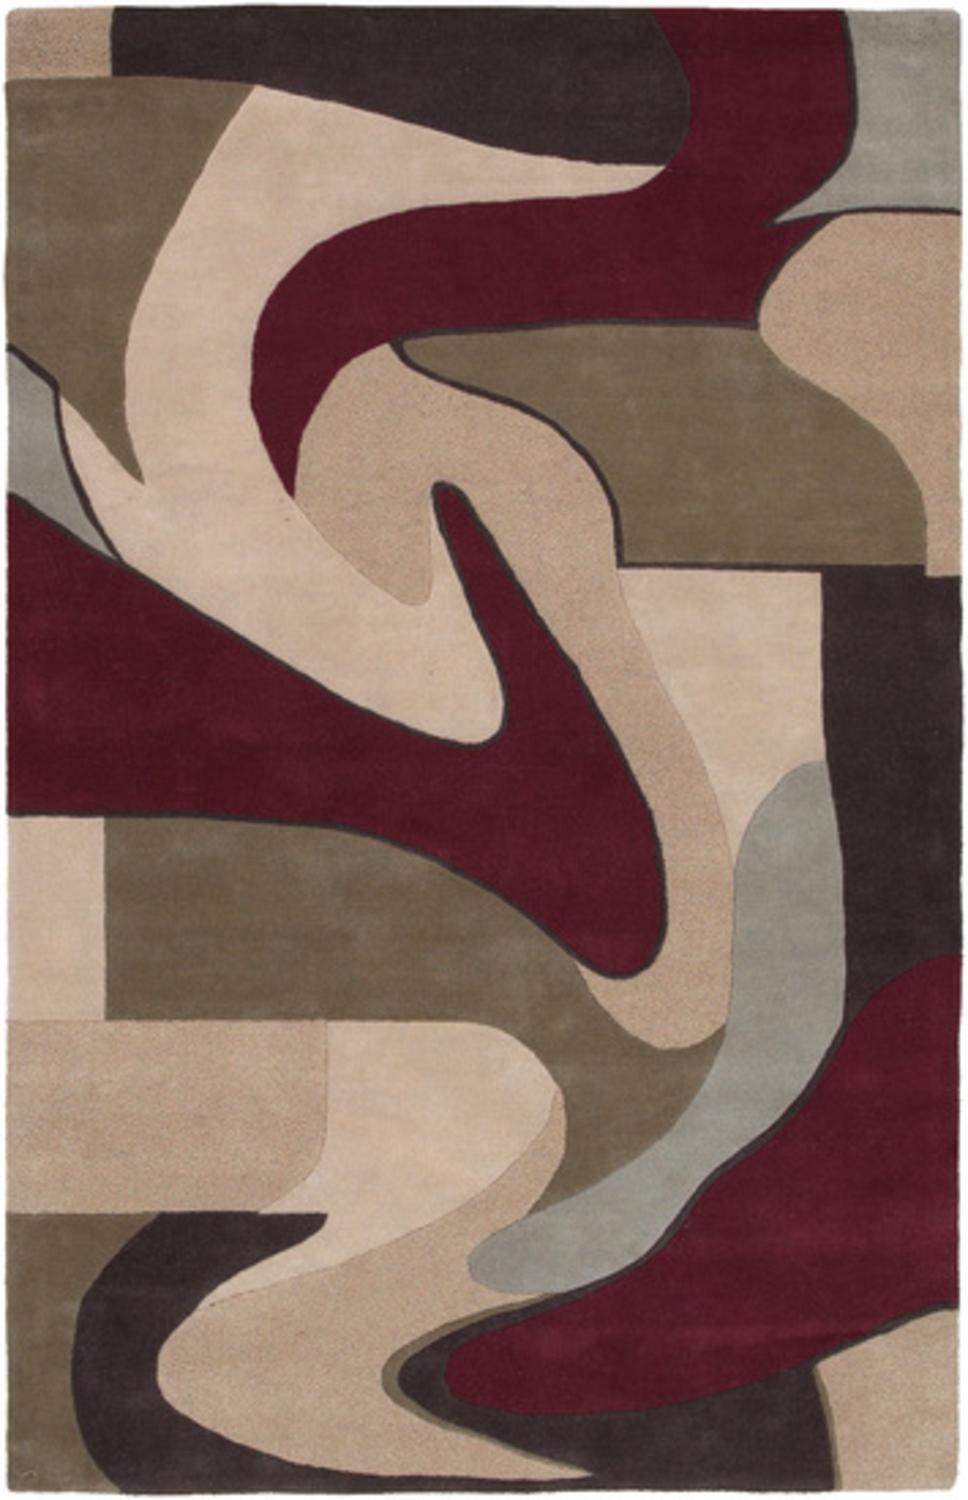 Diva At Home 2' x 3' Melting Lava Waves Coffee Burgundy and Tan Wool Area Throw Rug